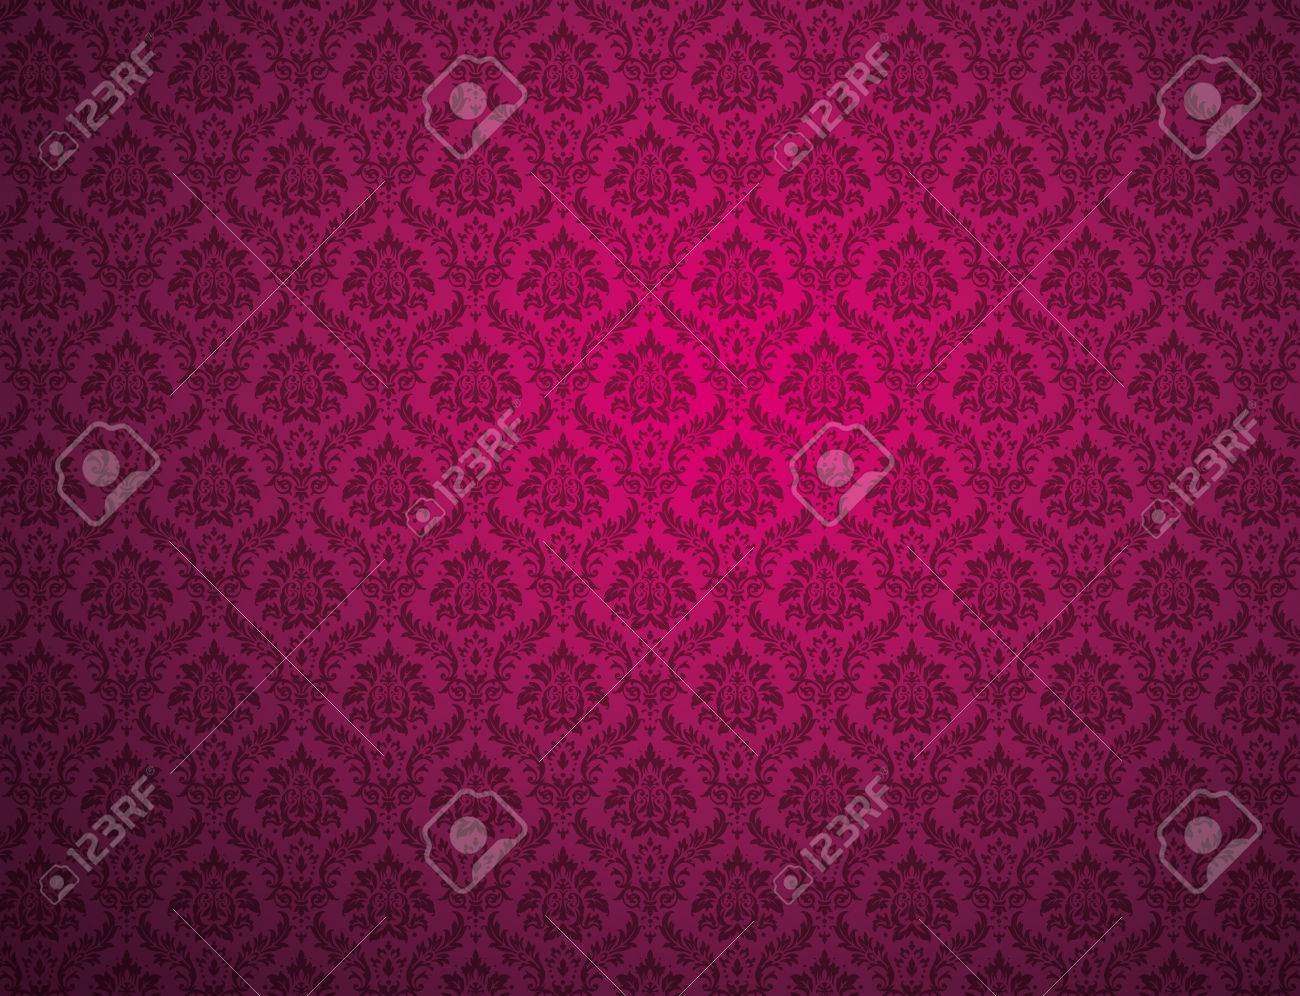 Purple Damask Wallpaper With Floral Patterns Stock Photo Picture